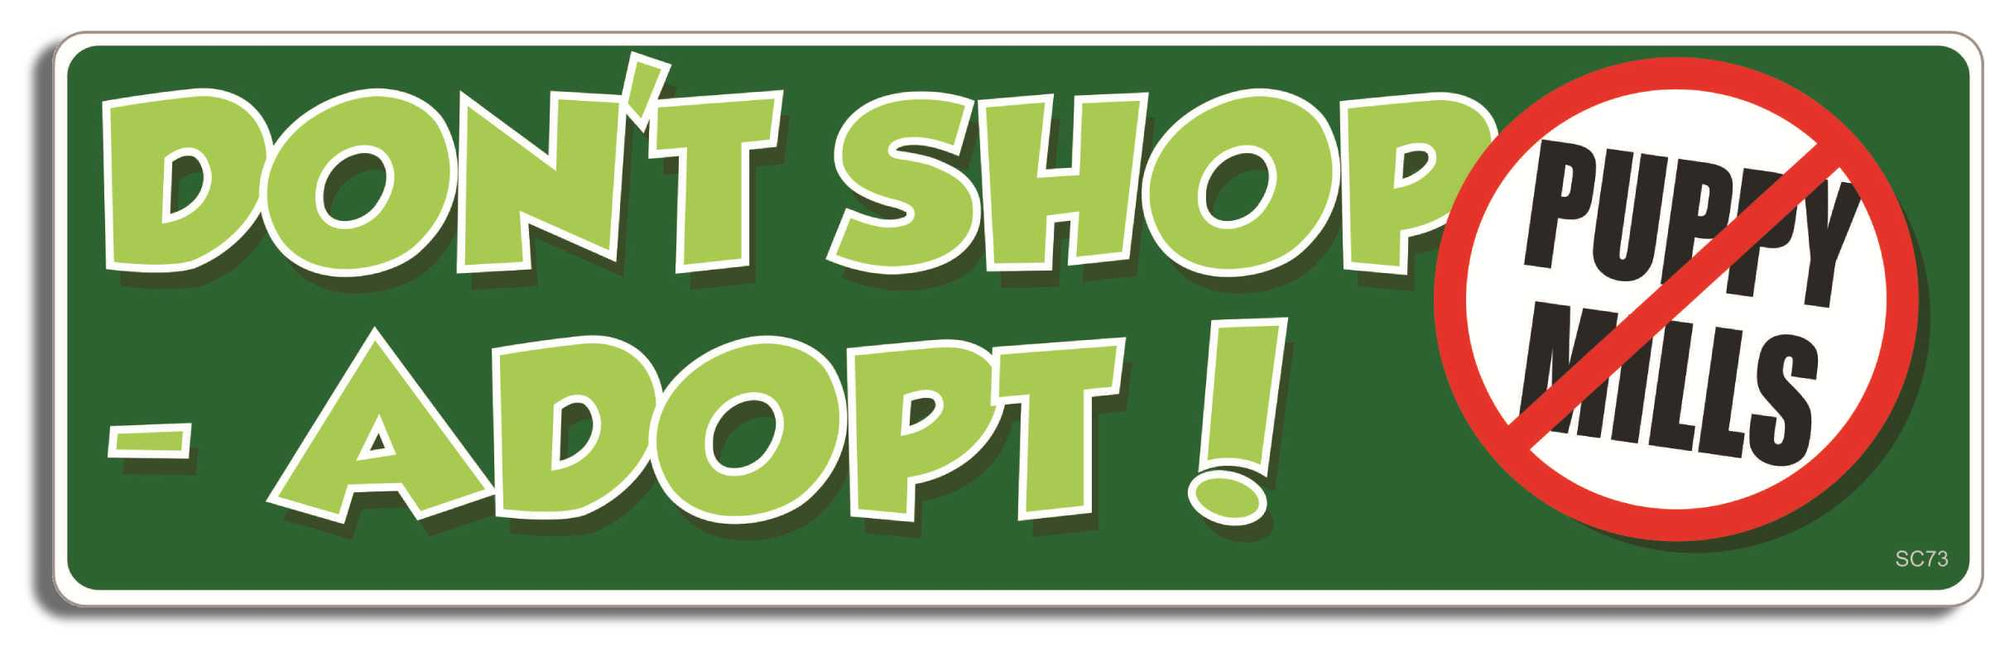 Don't shop - adopt (No puppy mills) - 3" x 10" Bumper Sticker--Car Magnet- -  Decal Bumper Sticker-political Bumper Sticker Car Magnet Don't shop-adopt (No puppy mills)  Decal for carsanimal rights, Cats, Dogs, Pet owners, peta, vegan, vegetarian